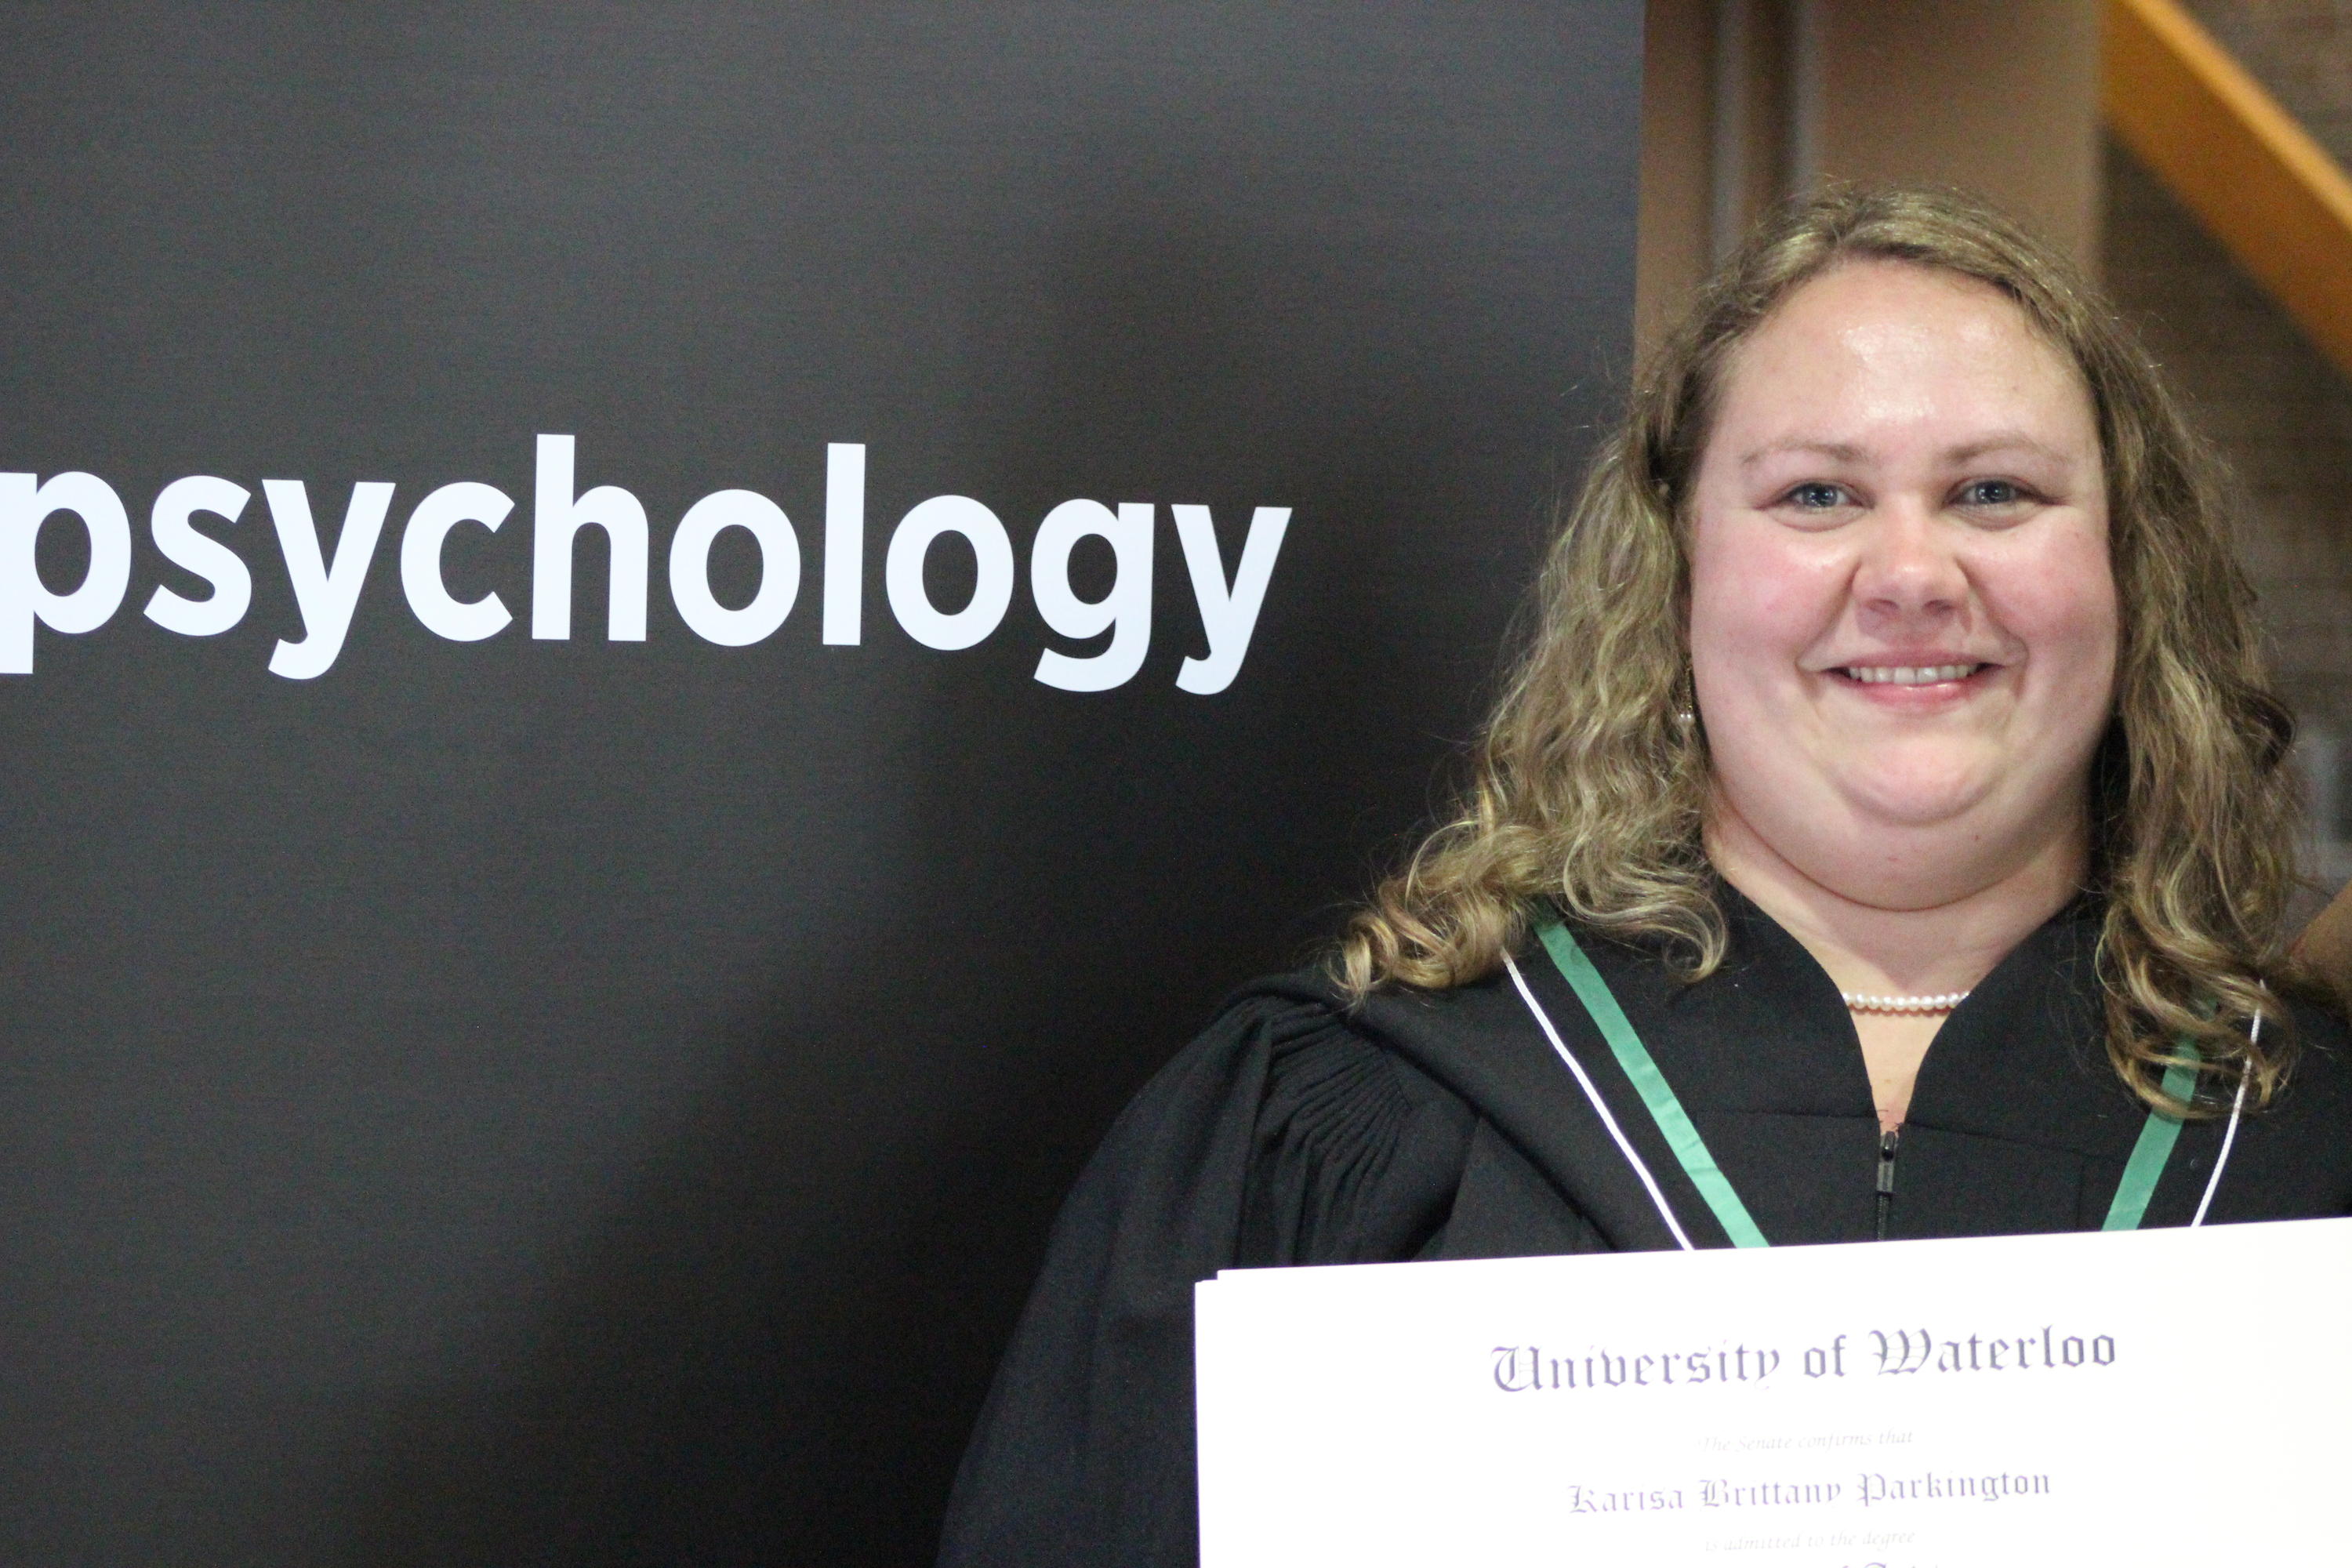 Karisa Parkington received her Master of Arts degree in the department of psychology.